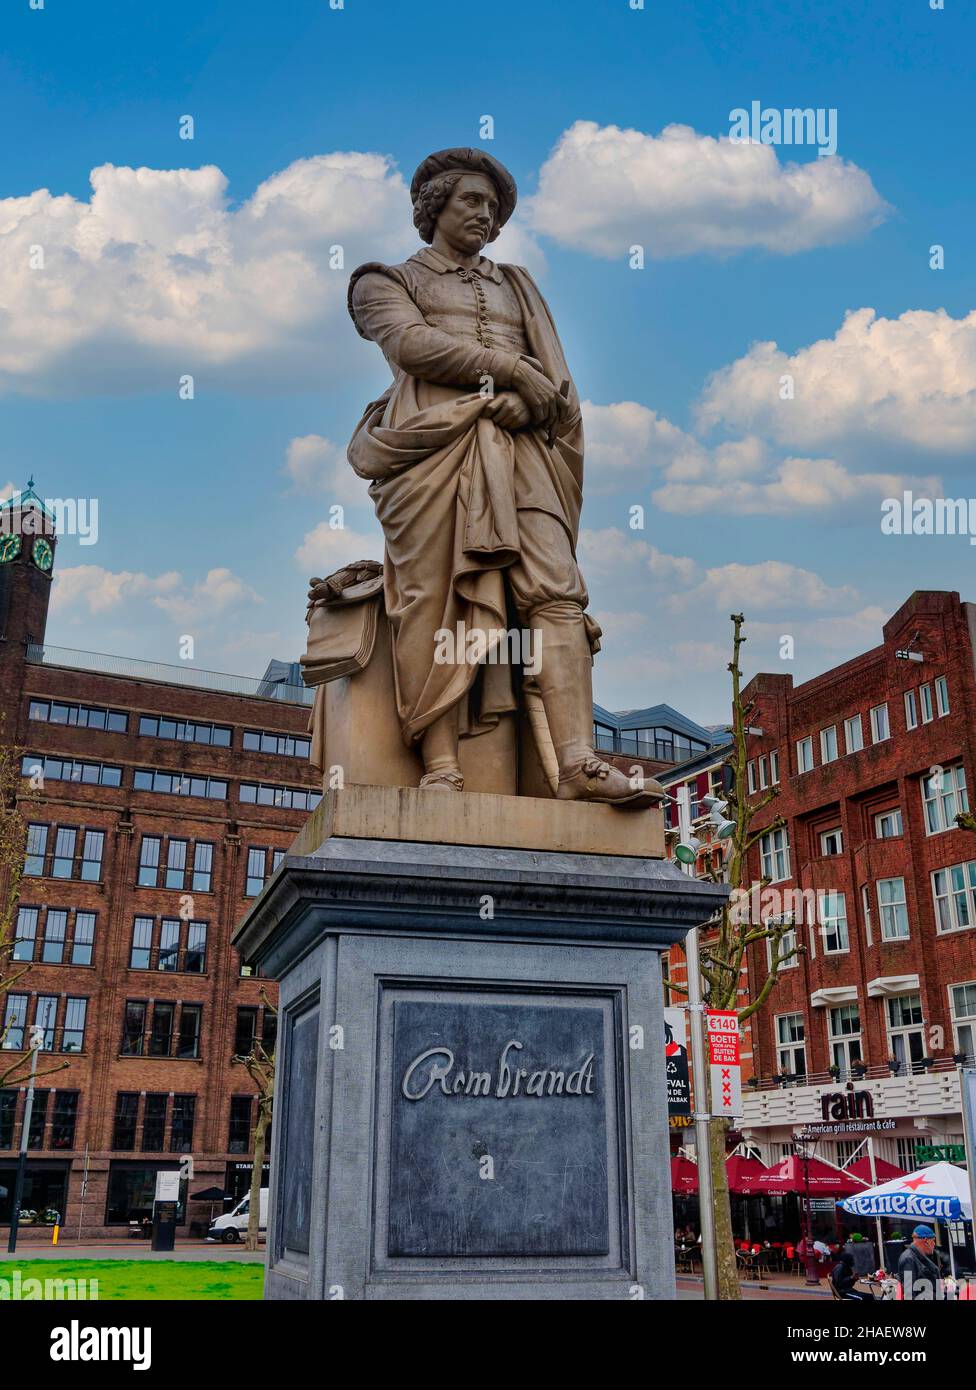 Amsterdam, Netherlands - May, 2021: Closeup of bust of Rembrandt statue under blue cloudscape, with clock tower in back on Rembrandtplein. Stock Photo